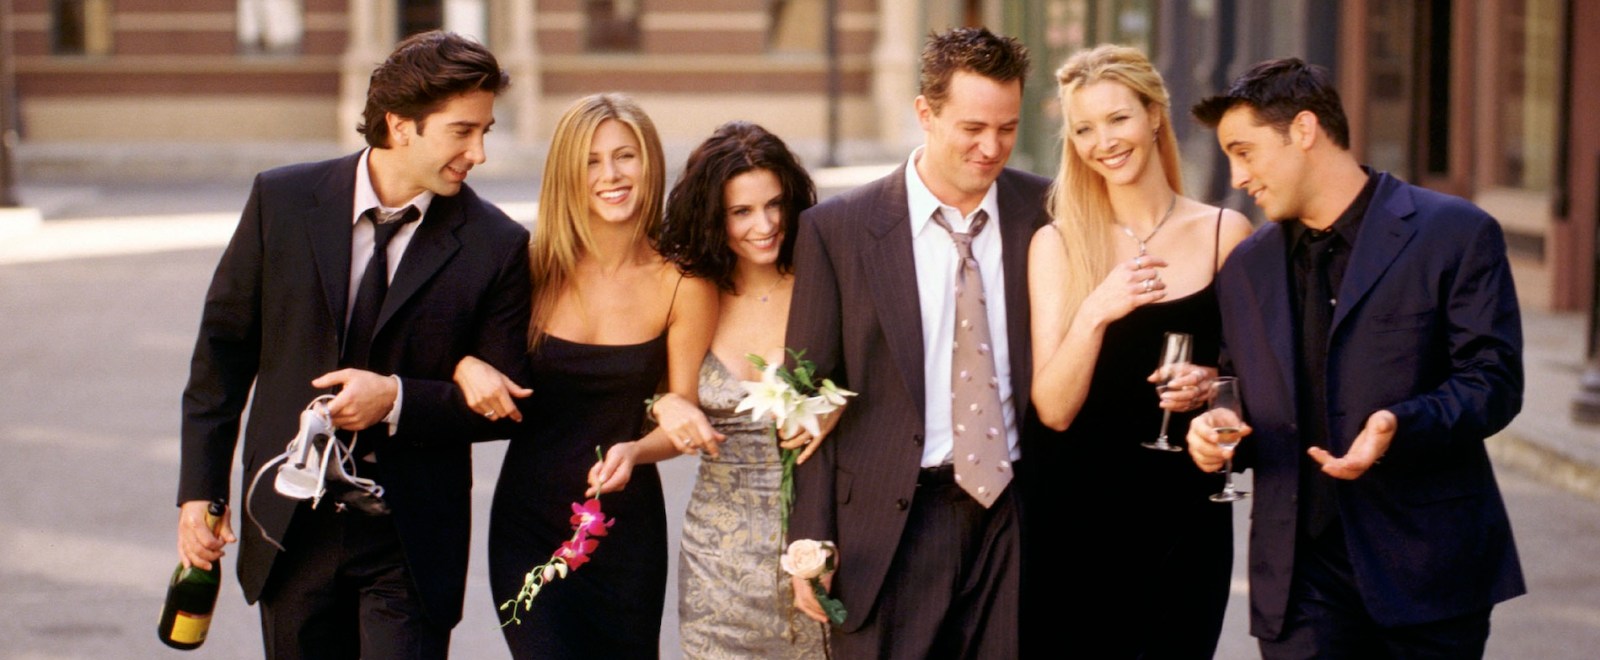 The ‘Friends’ Cast Is Trying To Figure Out How To Celebrate The 20th Anniversary Of The Series Finale Without Matthew Perry